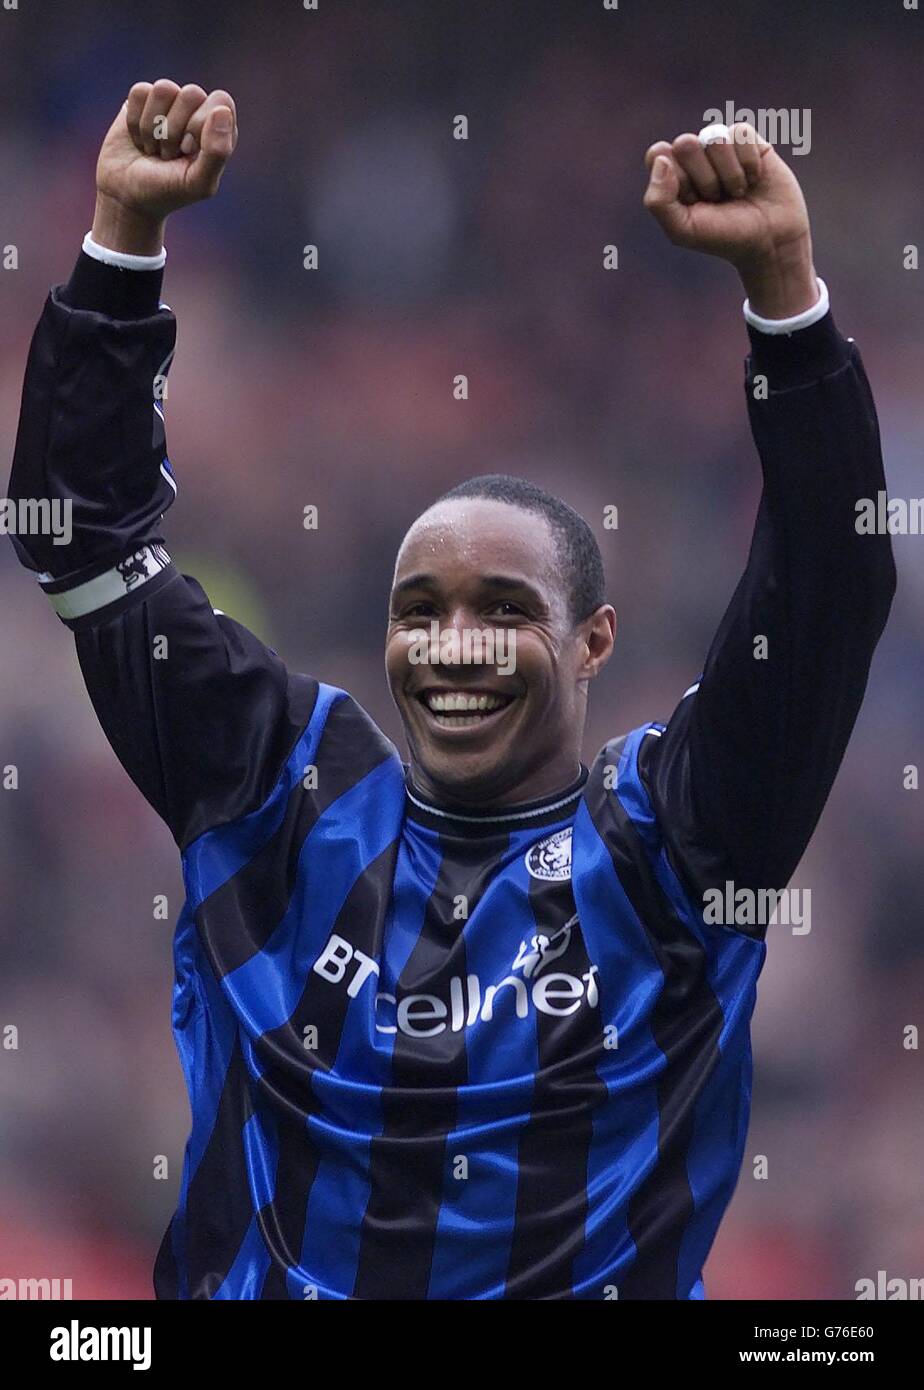 Paul Ince celebrates after helping his Middlesbrough team defeat Manchester United in their FA Barclaycard Premiership match at Man Utd's Old Trafford stadium. Final Score: Man Utd 0 Middlebrough 1. Stock Photo